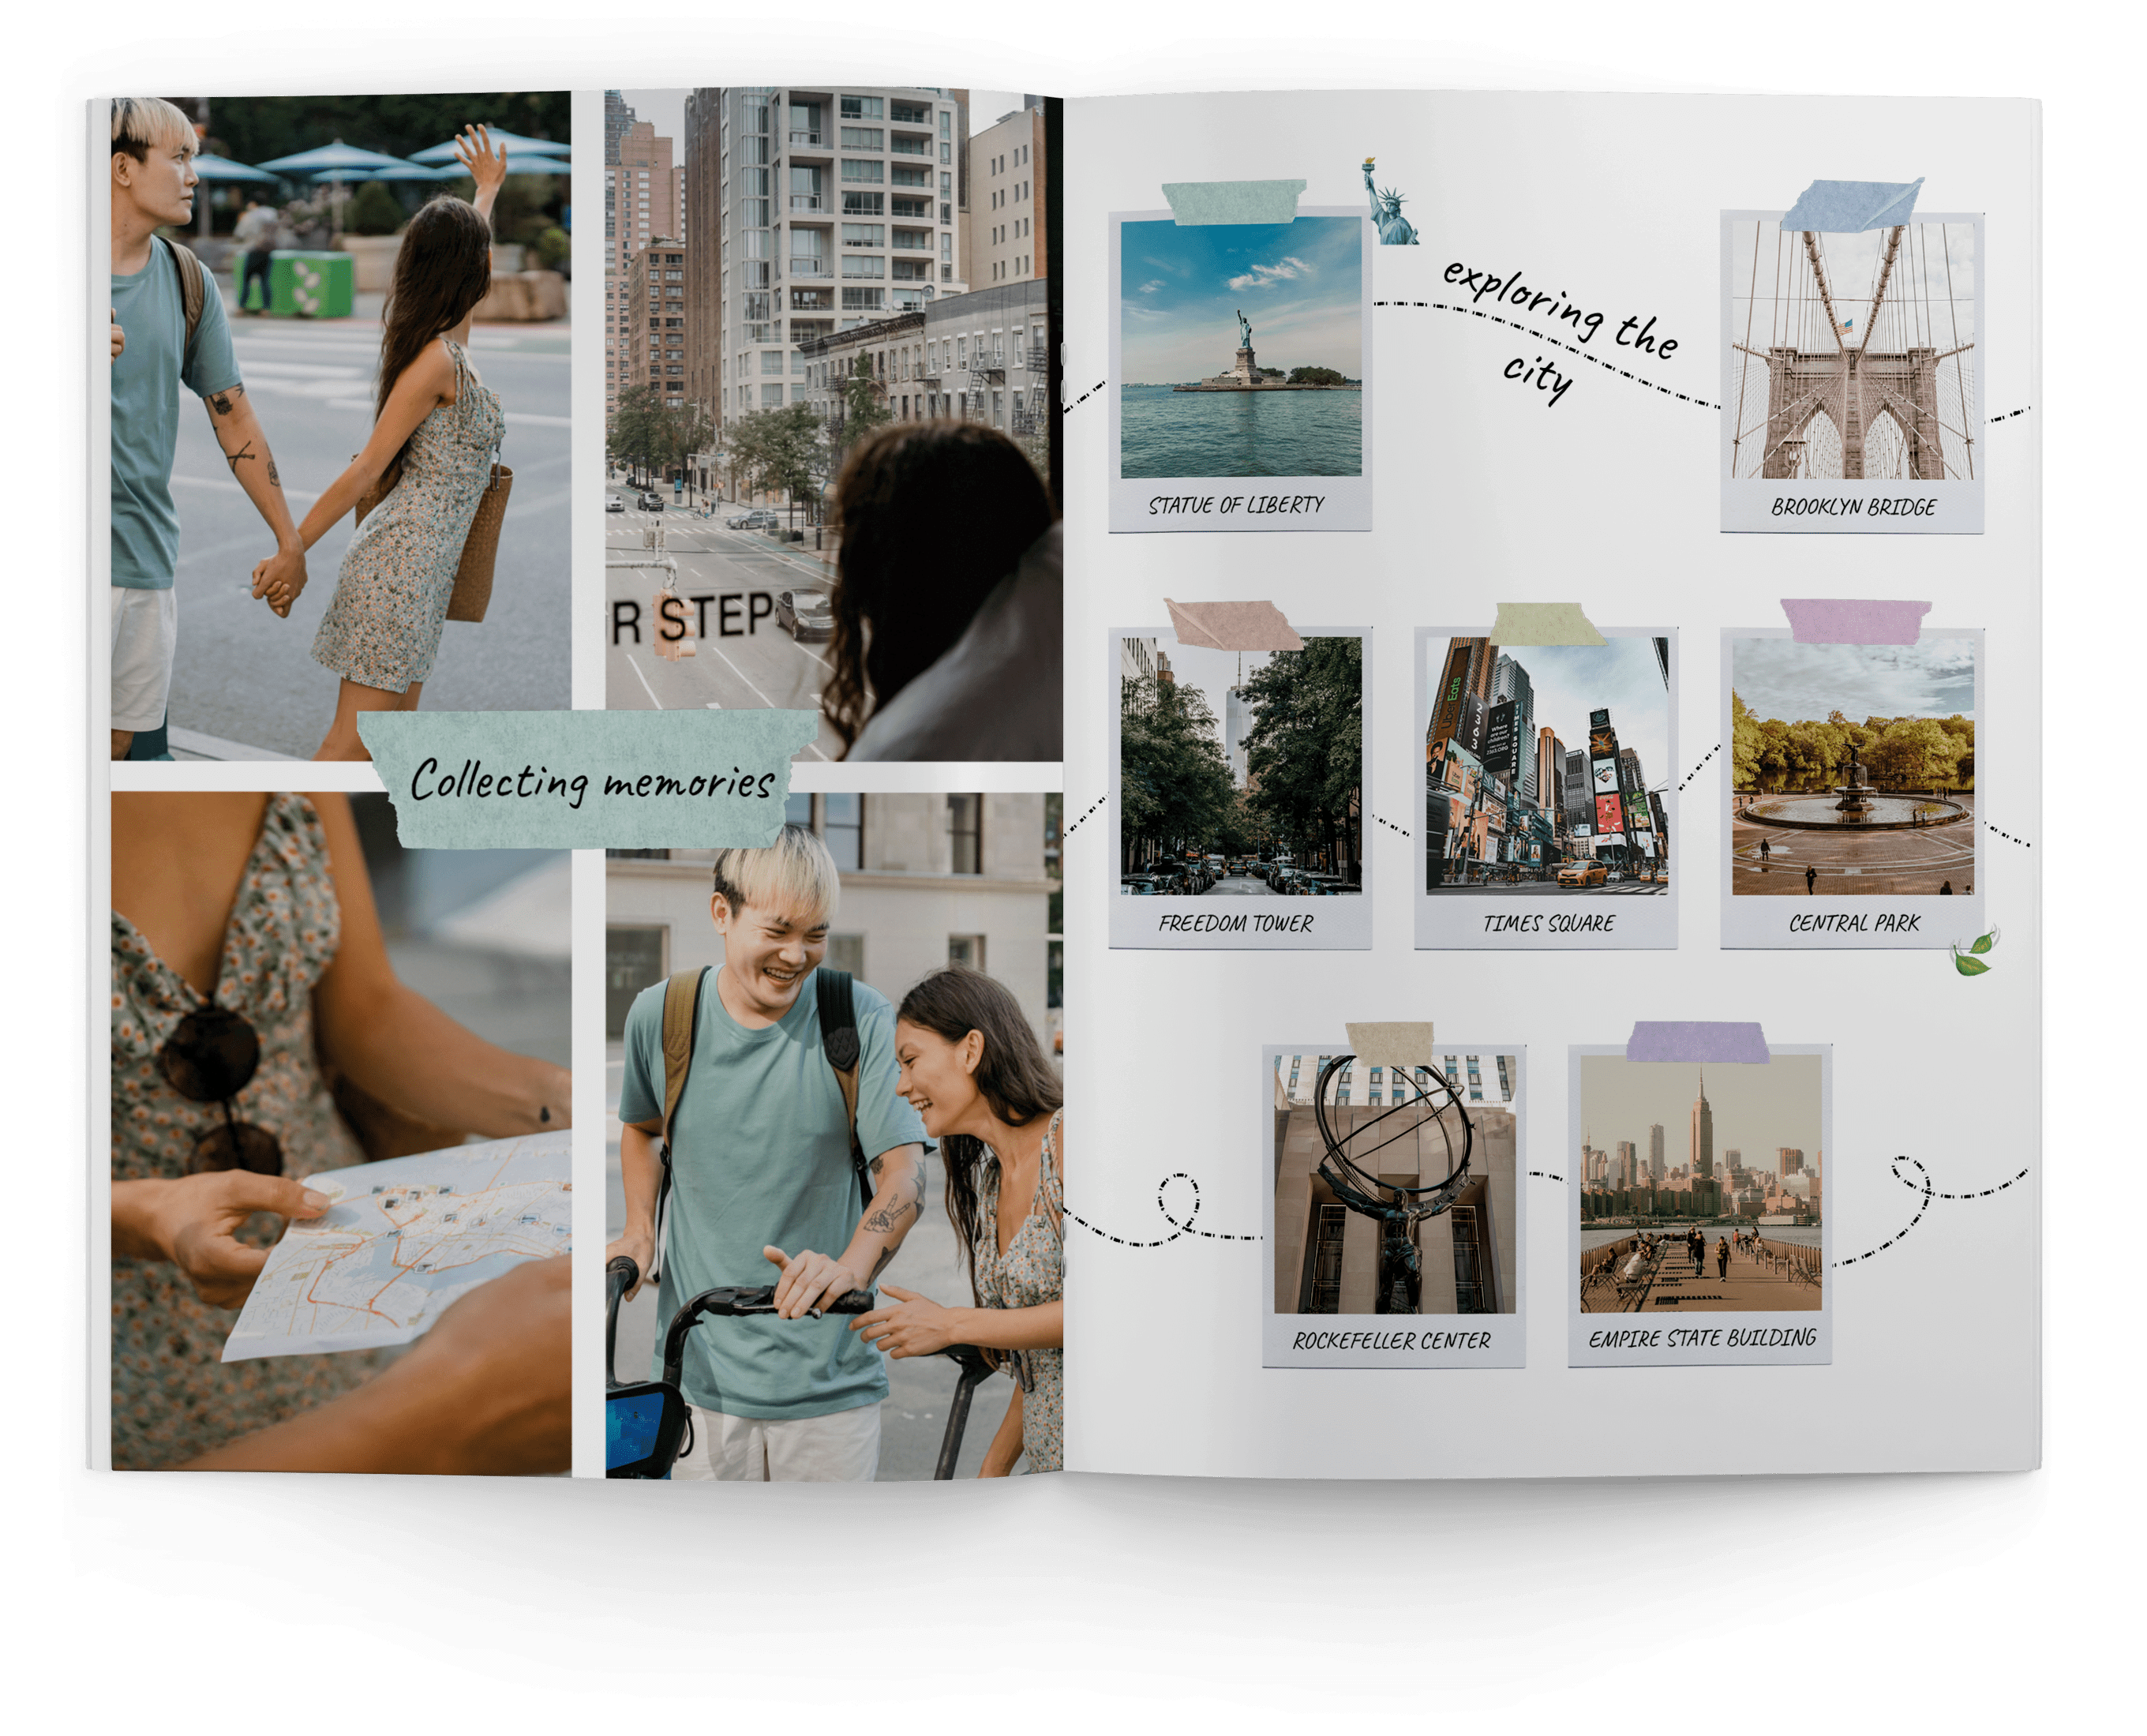 Design template for New York photo book with urban decorative elements